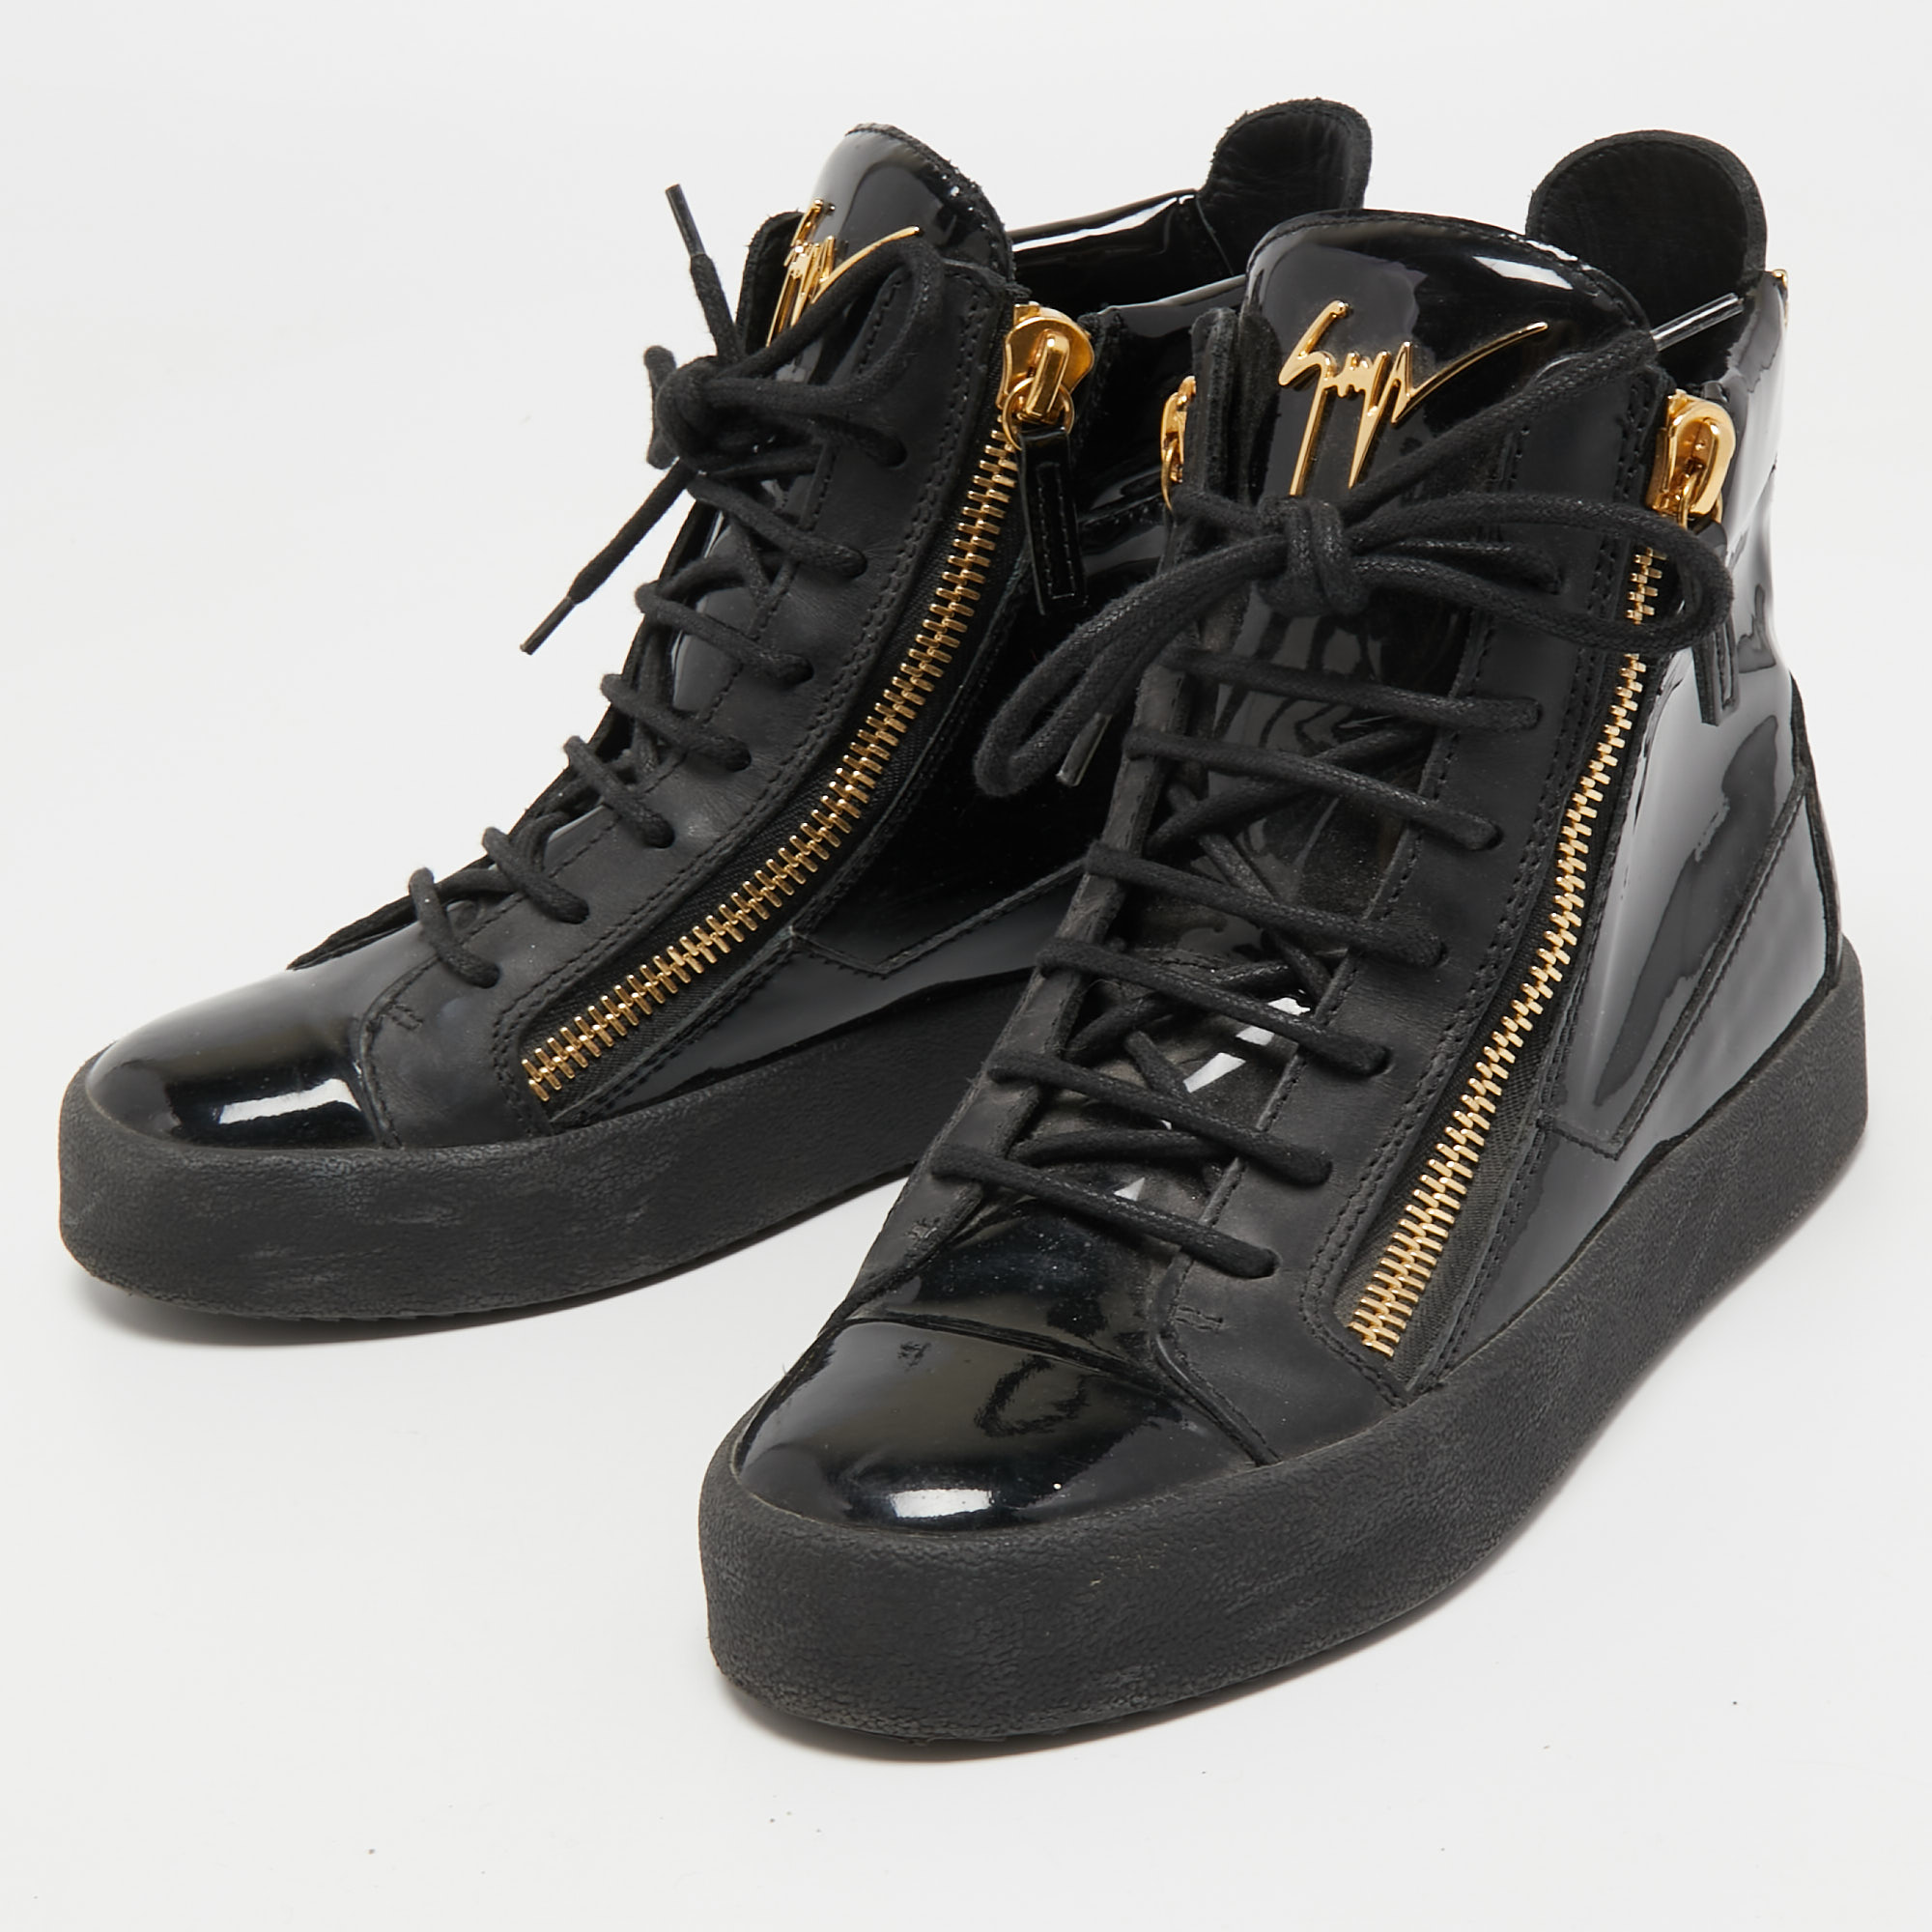 

Giuseppe Zanotti Black Patent and Leather Kriss High Top Sneakers Size